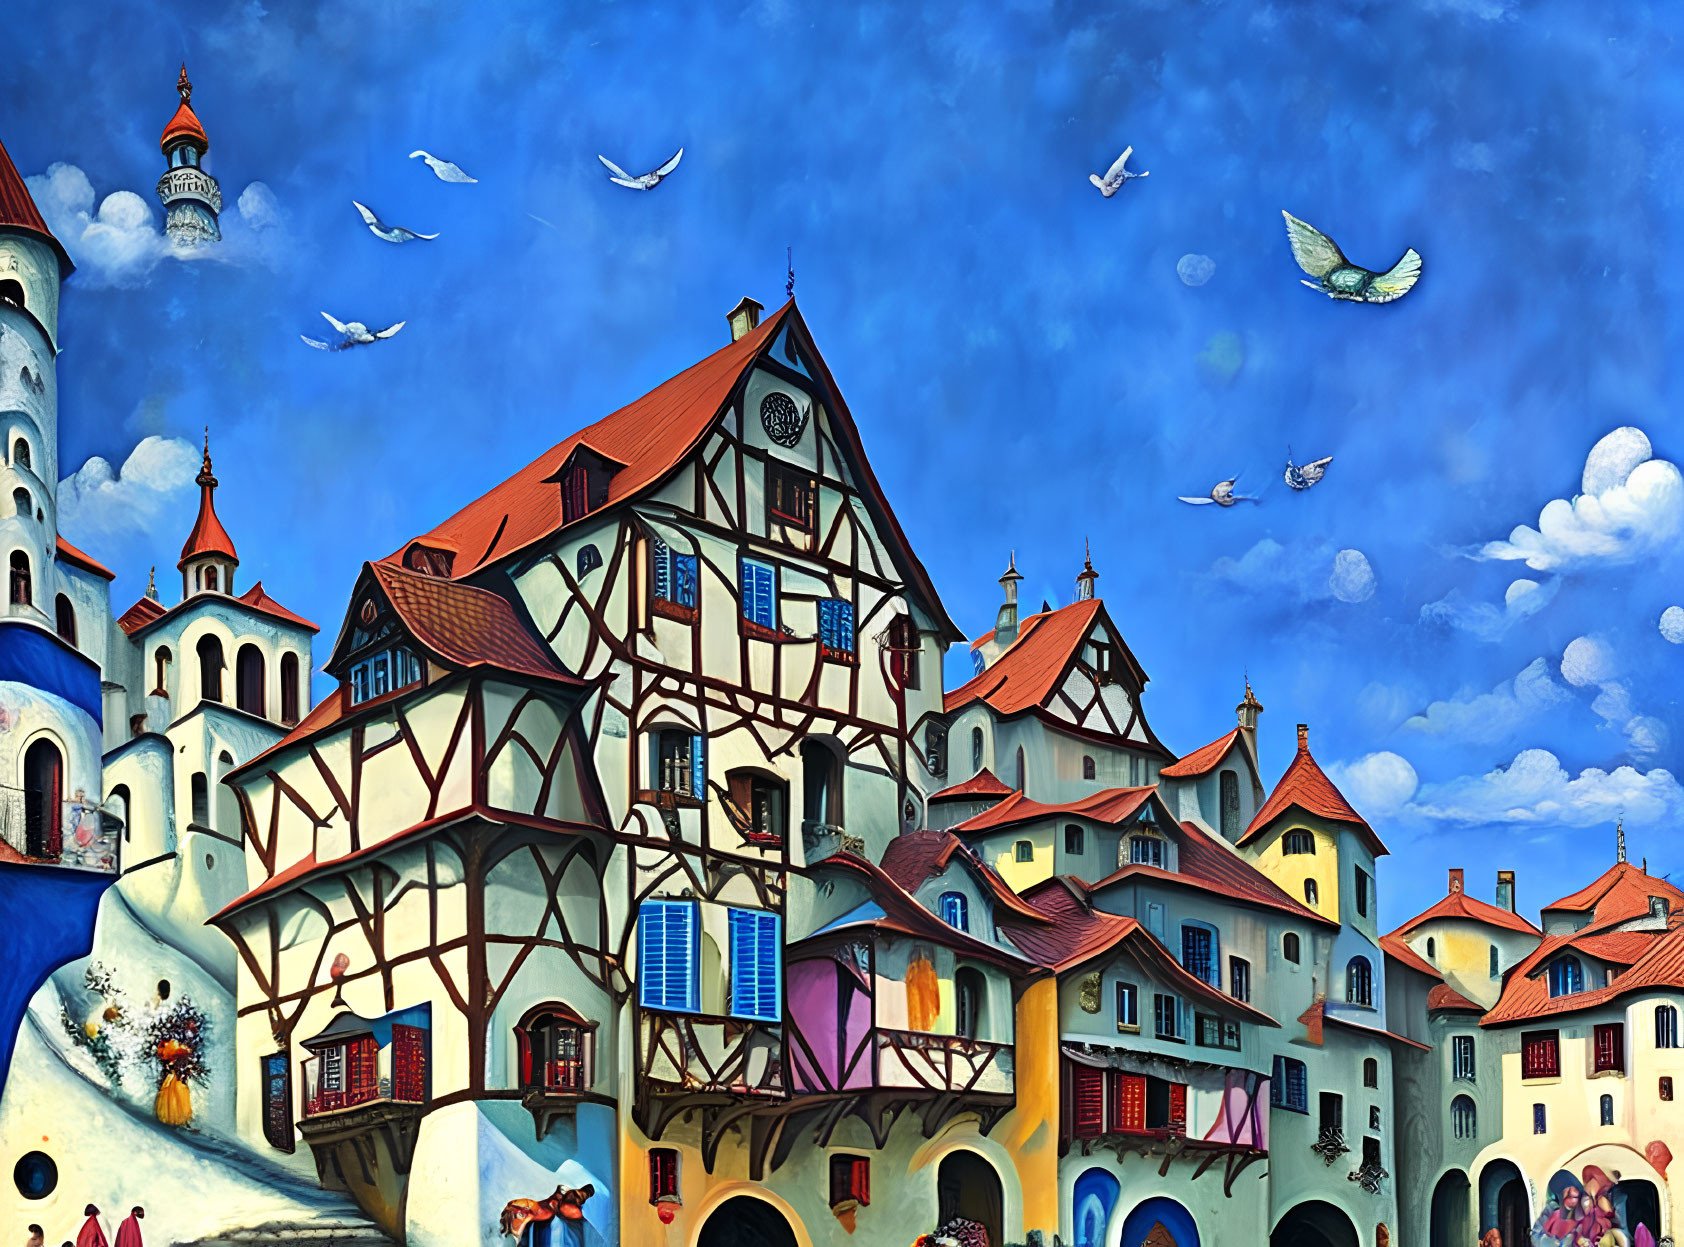 Colorful painting of European village with half-timbered buildings and birds in blue sky